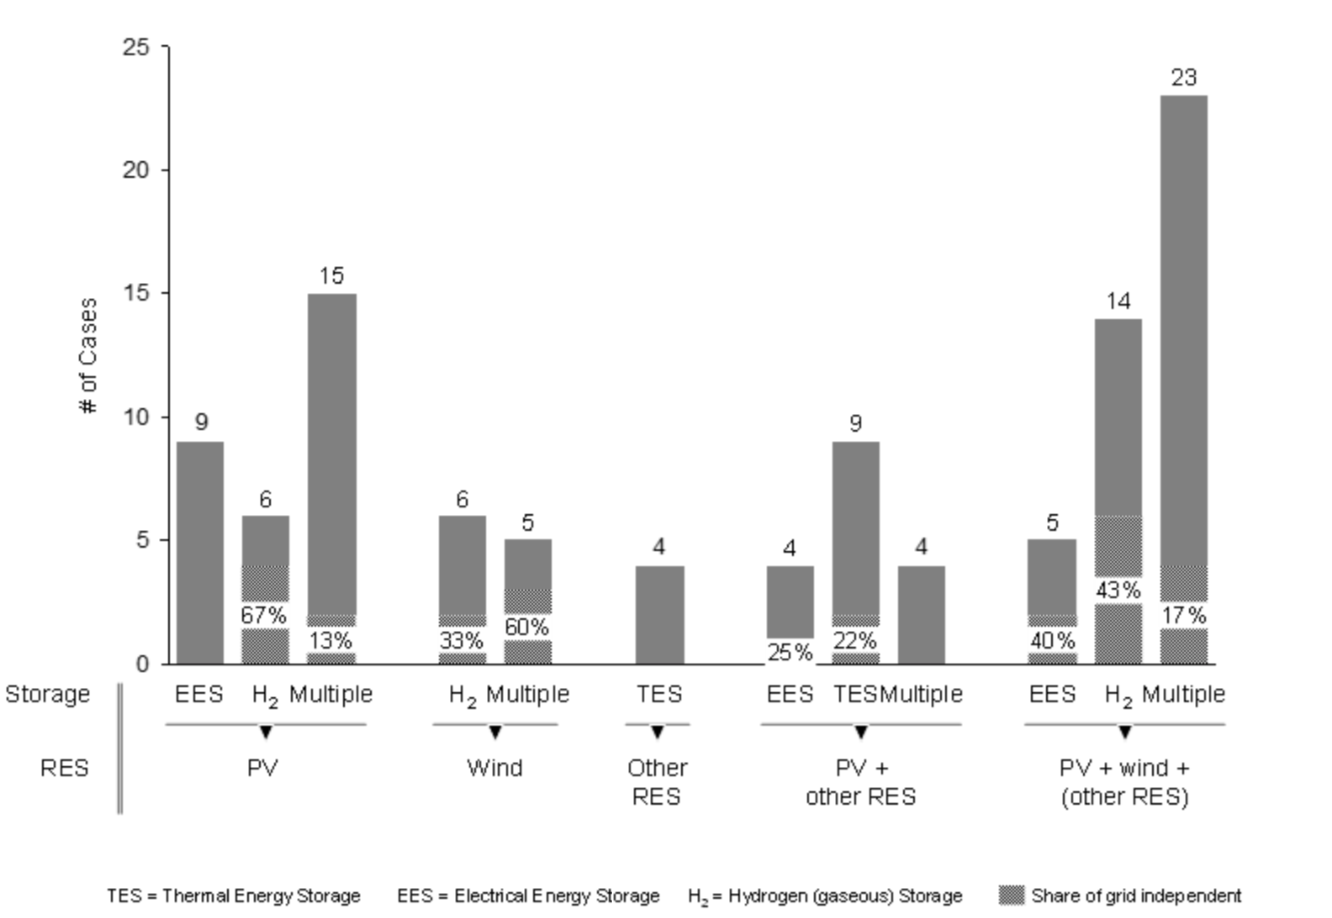 The multi-energy systems categorised according to the used technologies. The energy suppliers are listed in the bottom line – photovoltaics (PV), wind, rarely used systems such as geothermal or solar thermal power (other RES) and combinations of these. The top line designates the storage devices: battery (EES), hydrogen storage device (H2), heat storage device (TES) as well as combinations of several technologies.